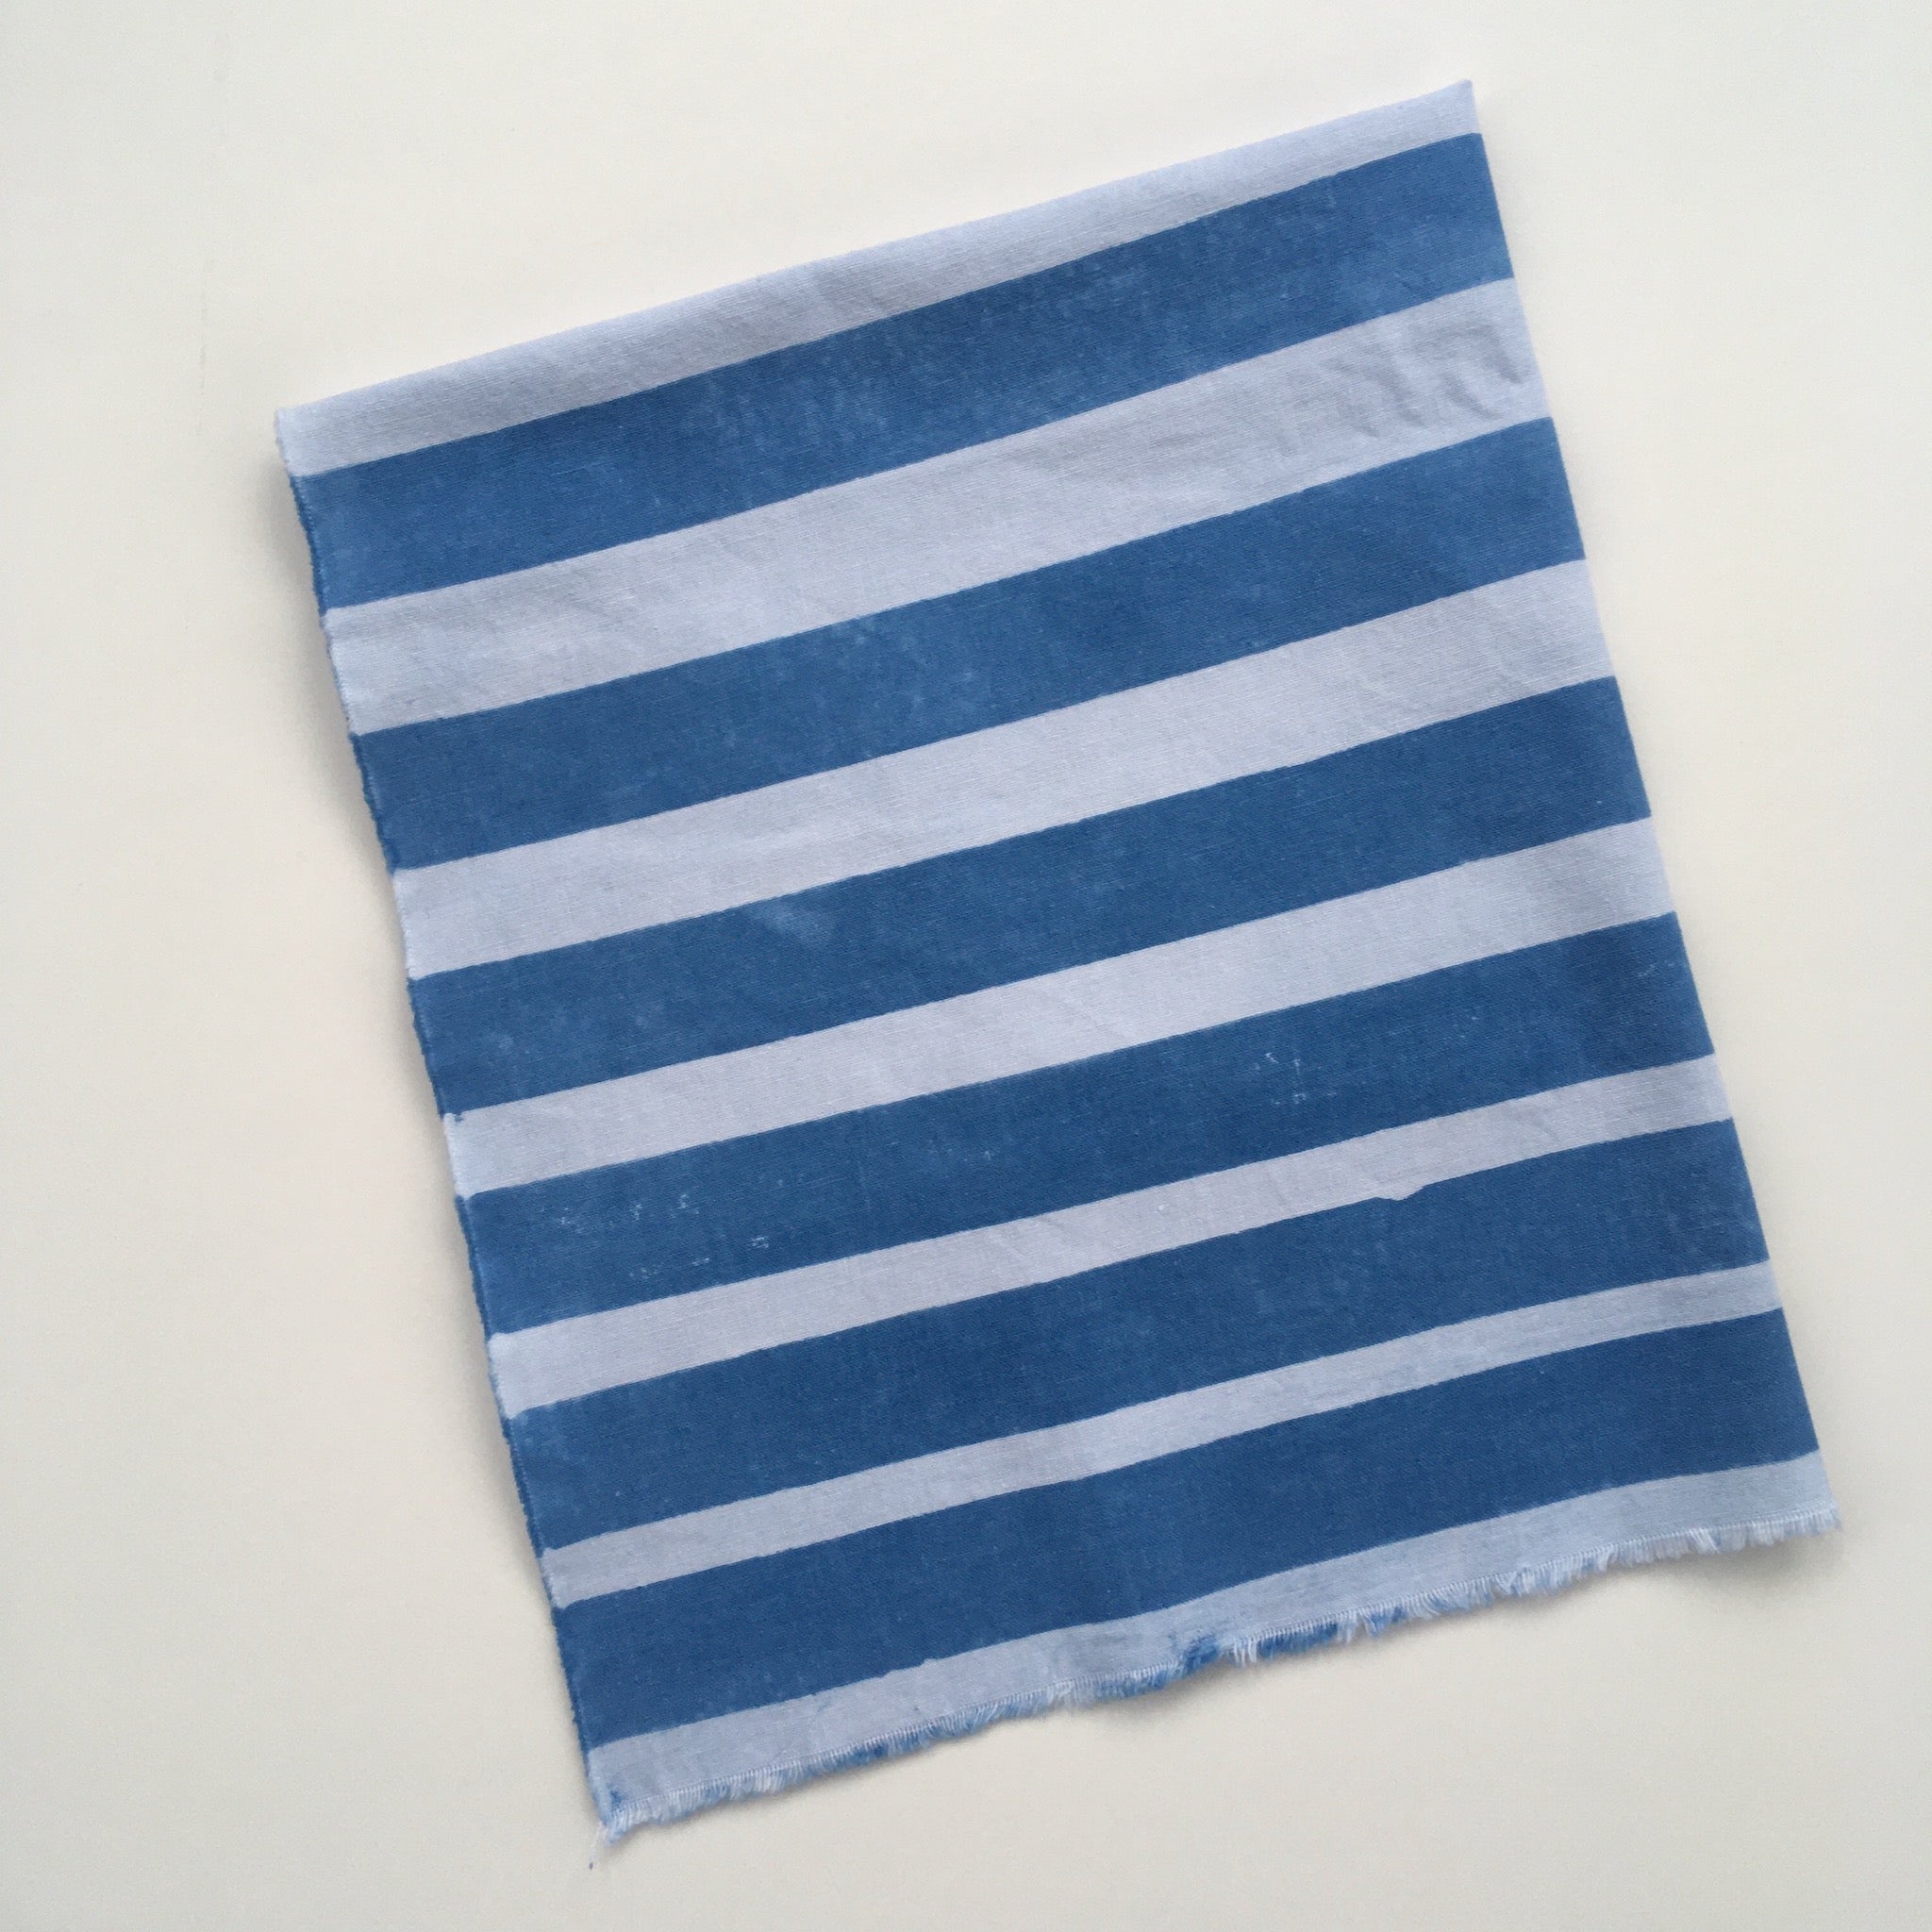 Fabric example dyed with clay resist: deep indigo blue with white stripes of varying width